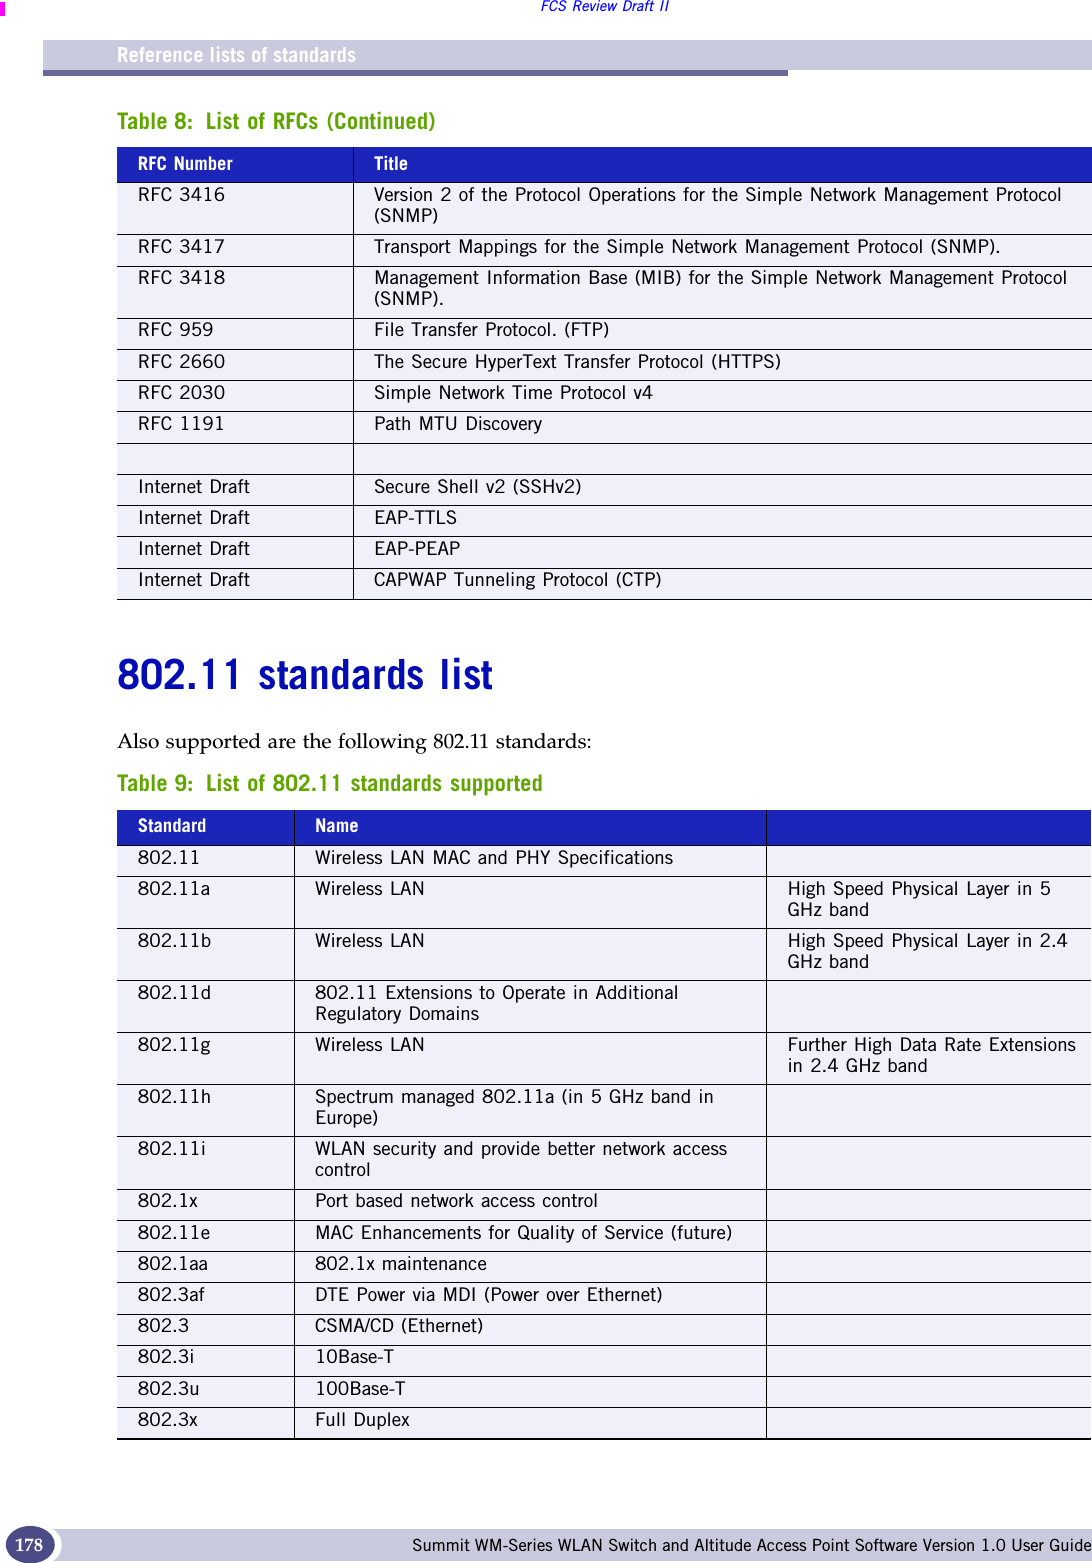 Reference lists of standardsFCS Review Draft IISummit WM-Series WLAN Switch and Altitude Access Point Software Version 1.0 User Guide178802.11 standards listAlso supported are the following 802.11 standards:RFC 3416 Version 2 of the Protocol Operations for the Simple Network Management Protocol (SNMP)RFC 3417 Transport Mappings for the Simple Network Management Protocol (SNMP). RFC 3418 Management Information Base (MIB) for the Simple Network Management Protocol (SNMP).RFC 959 File Transfer Protocol. (FTP)RFC 2660 The Secure HyperText Transfer Protocol (HTTPS)RFC 2030 Simple Network Time Protocol v4RFC 1191 Path MTU DiscoveryInternet Draft Secure Shell v2 (SSHv2)Internet Draft EAP-TTLSInternet Draft EAP-PEAPInternet Draft CAPWAP Tunneling Protocol (CTP)Table 9: List of 802.11 standards supportedStandard Name802.11 Wireless LAN MAC and PHY Specifications802.11a Wireless LAN High Speed Physical Layer in 5 GHz band802.11b Wireless LAN High Speed Physical Layer in 2.4 GHz band802.11d 802.11 Extensions to Operate in Additional Regulatory Domains802.11g Wireless LAN Further High Data Rate Extensions in 2.4 GHz band802.11h Spectrum managed 802.11a (in 5 GHz band in Europe)802.11i  WLAN security and provide better network access control802.1x Port based network access control802.11e MAC Enhancements for Quality of Service (future)802.1aa 802.1x maintenance802.3af DTE Power via MDI (Power over Ethernet)802.3 CSMA/CD (Ethernet)802.3i 10Base-T802.3u 100Base-T802.3x Full DuplexTable 8: List of RFCs (Continued)RFC Number Title